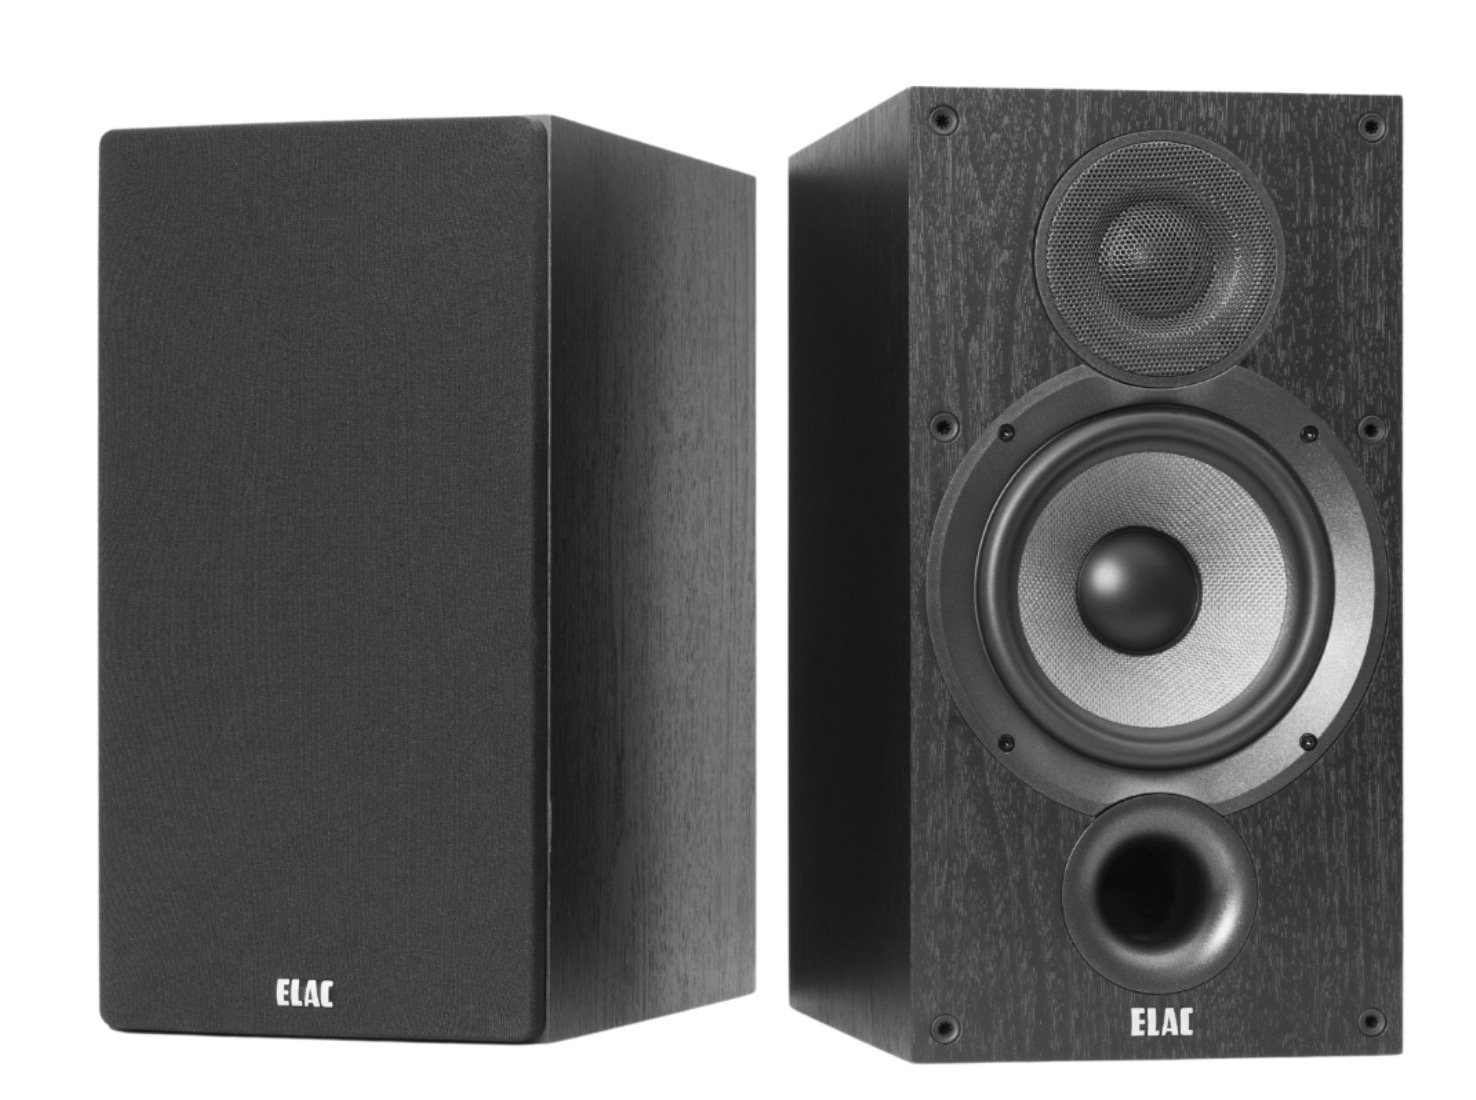 3030i Speakers From Q Acoustics - The Audiophile Man